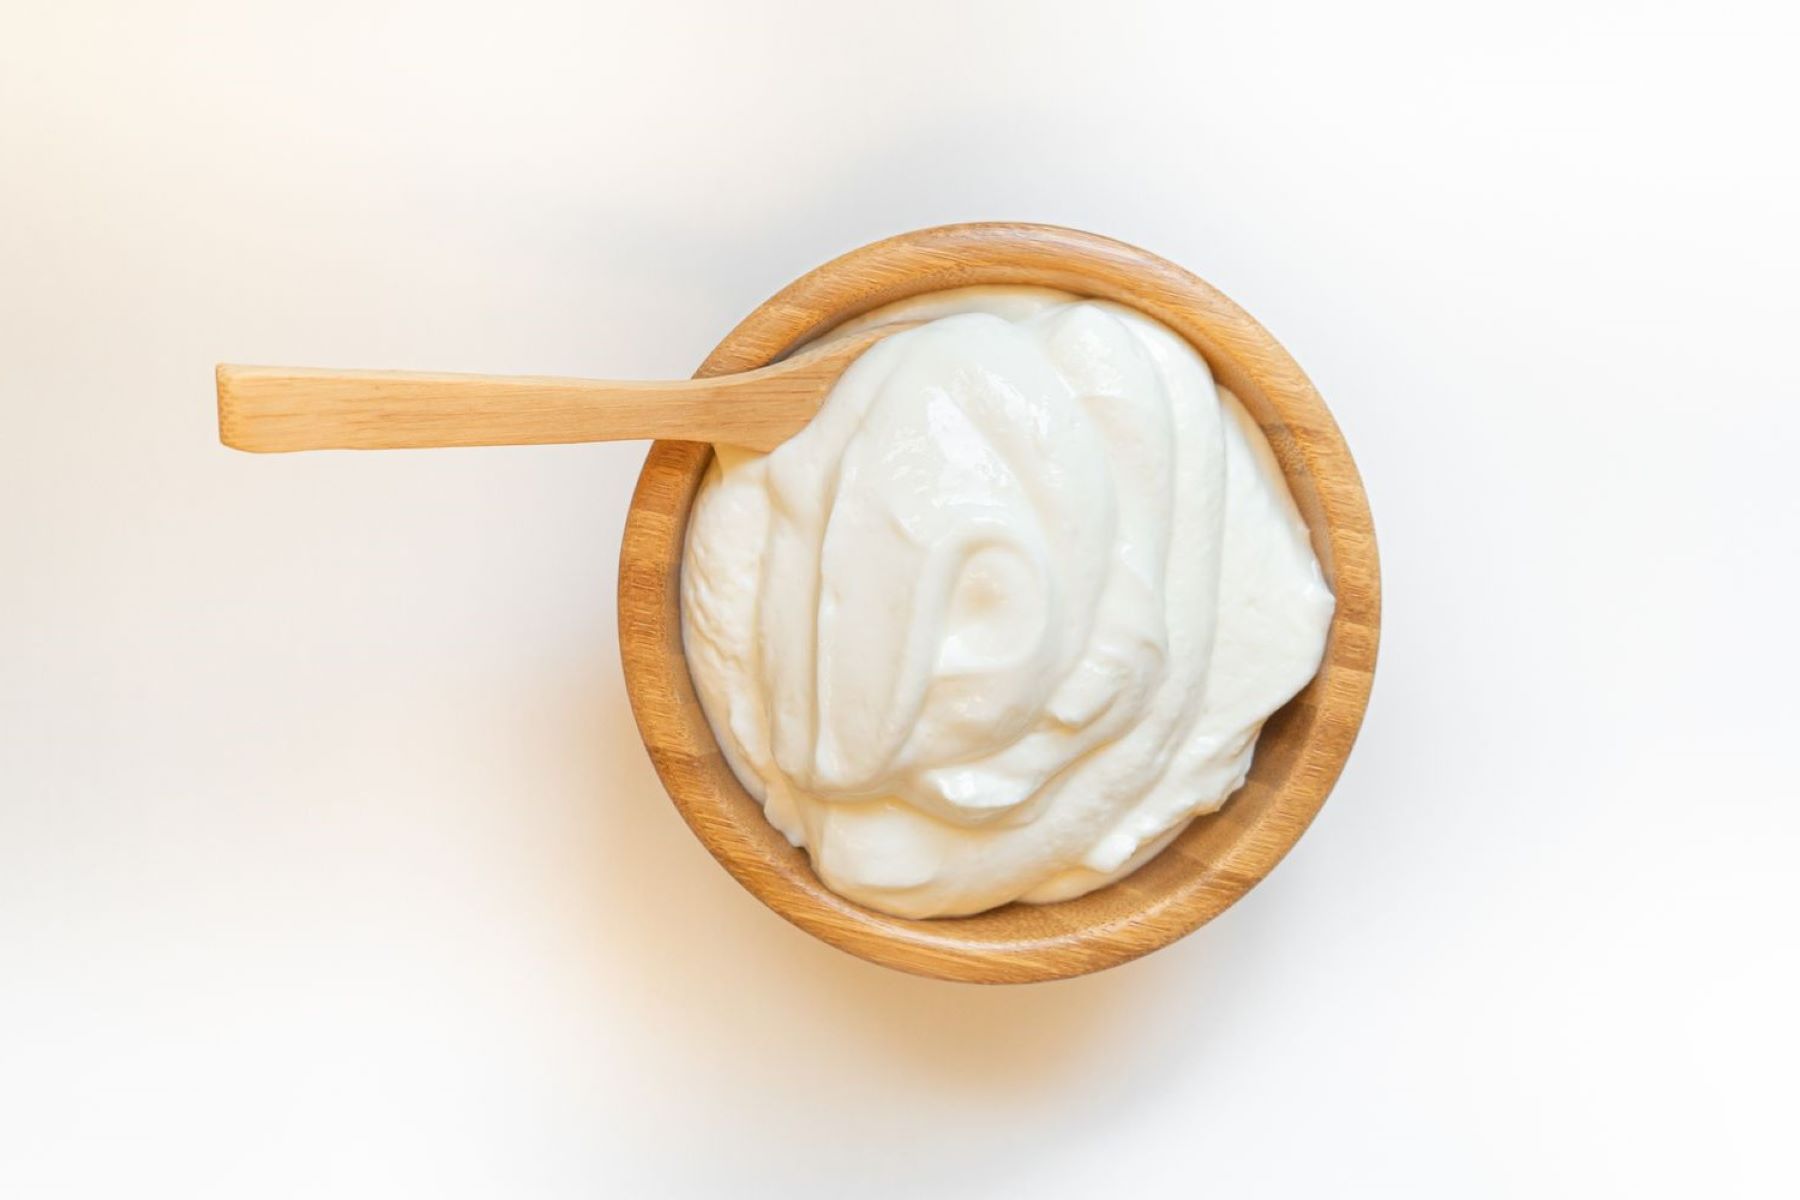 How To Determine The Shelf Life Of Sour Cream After The Best By Date